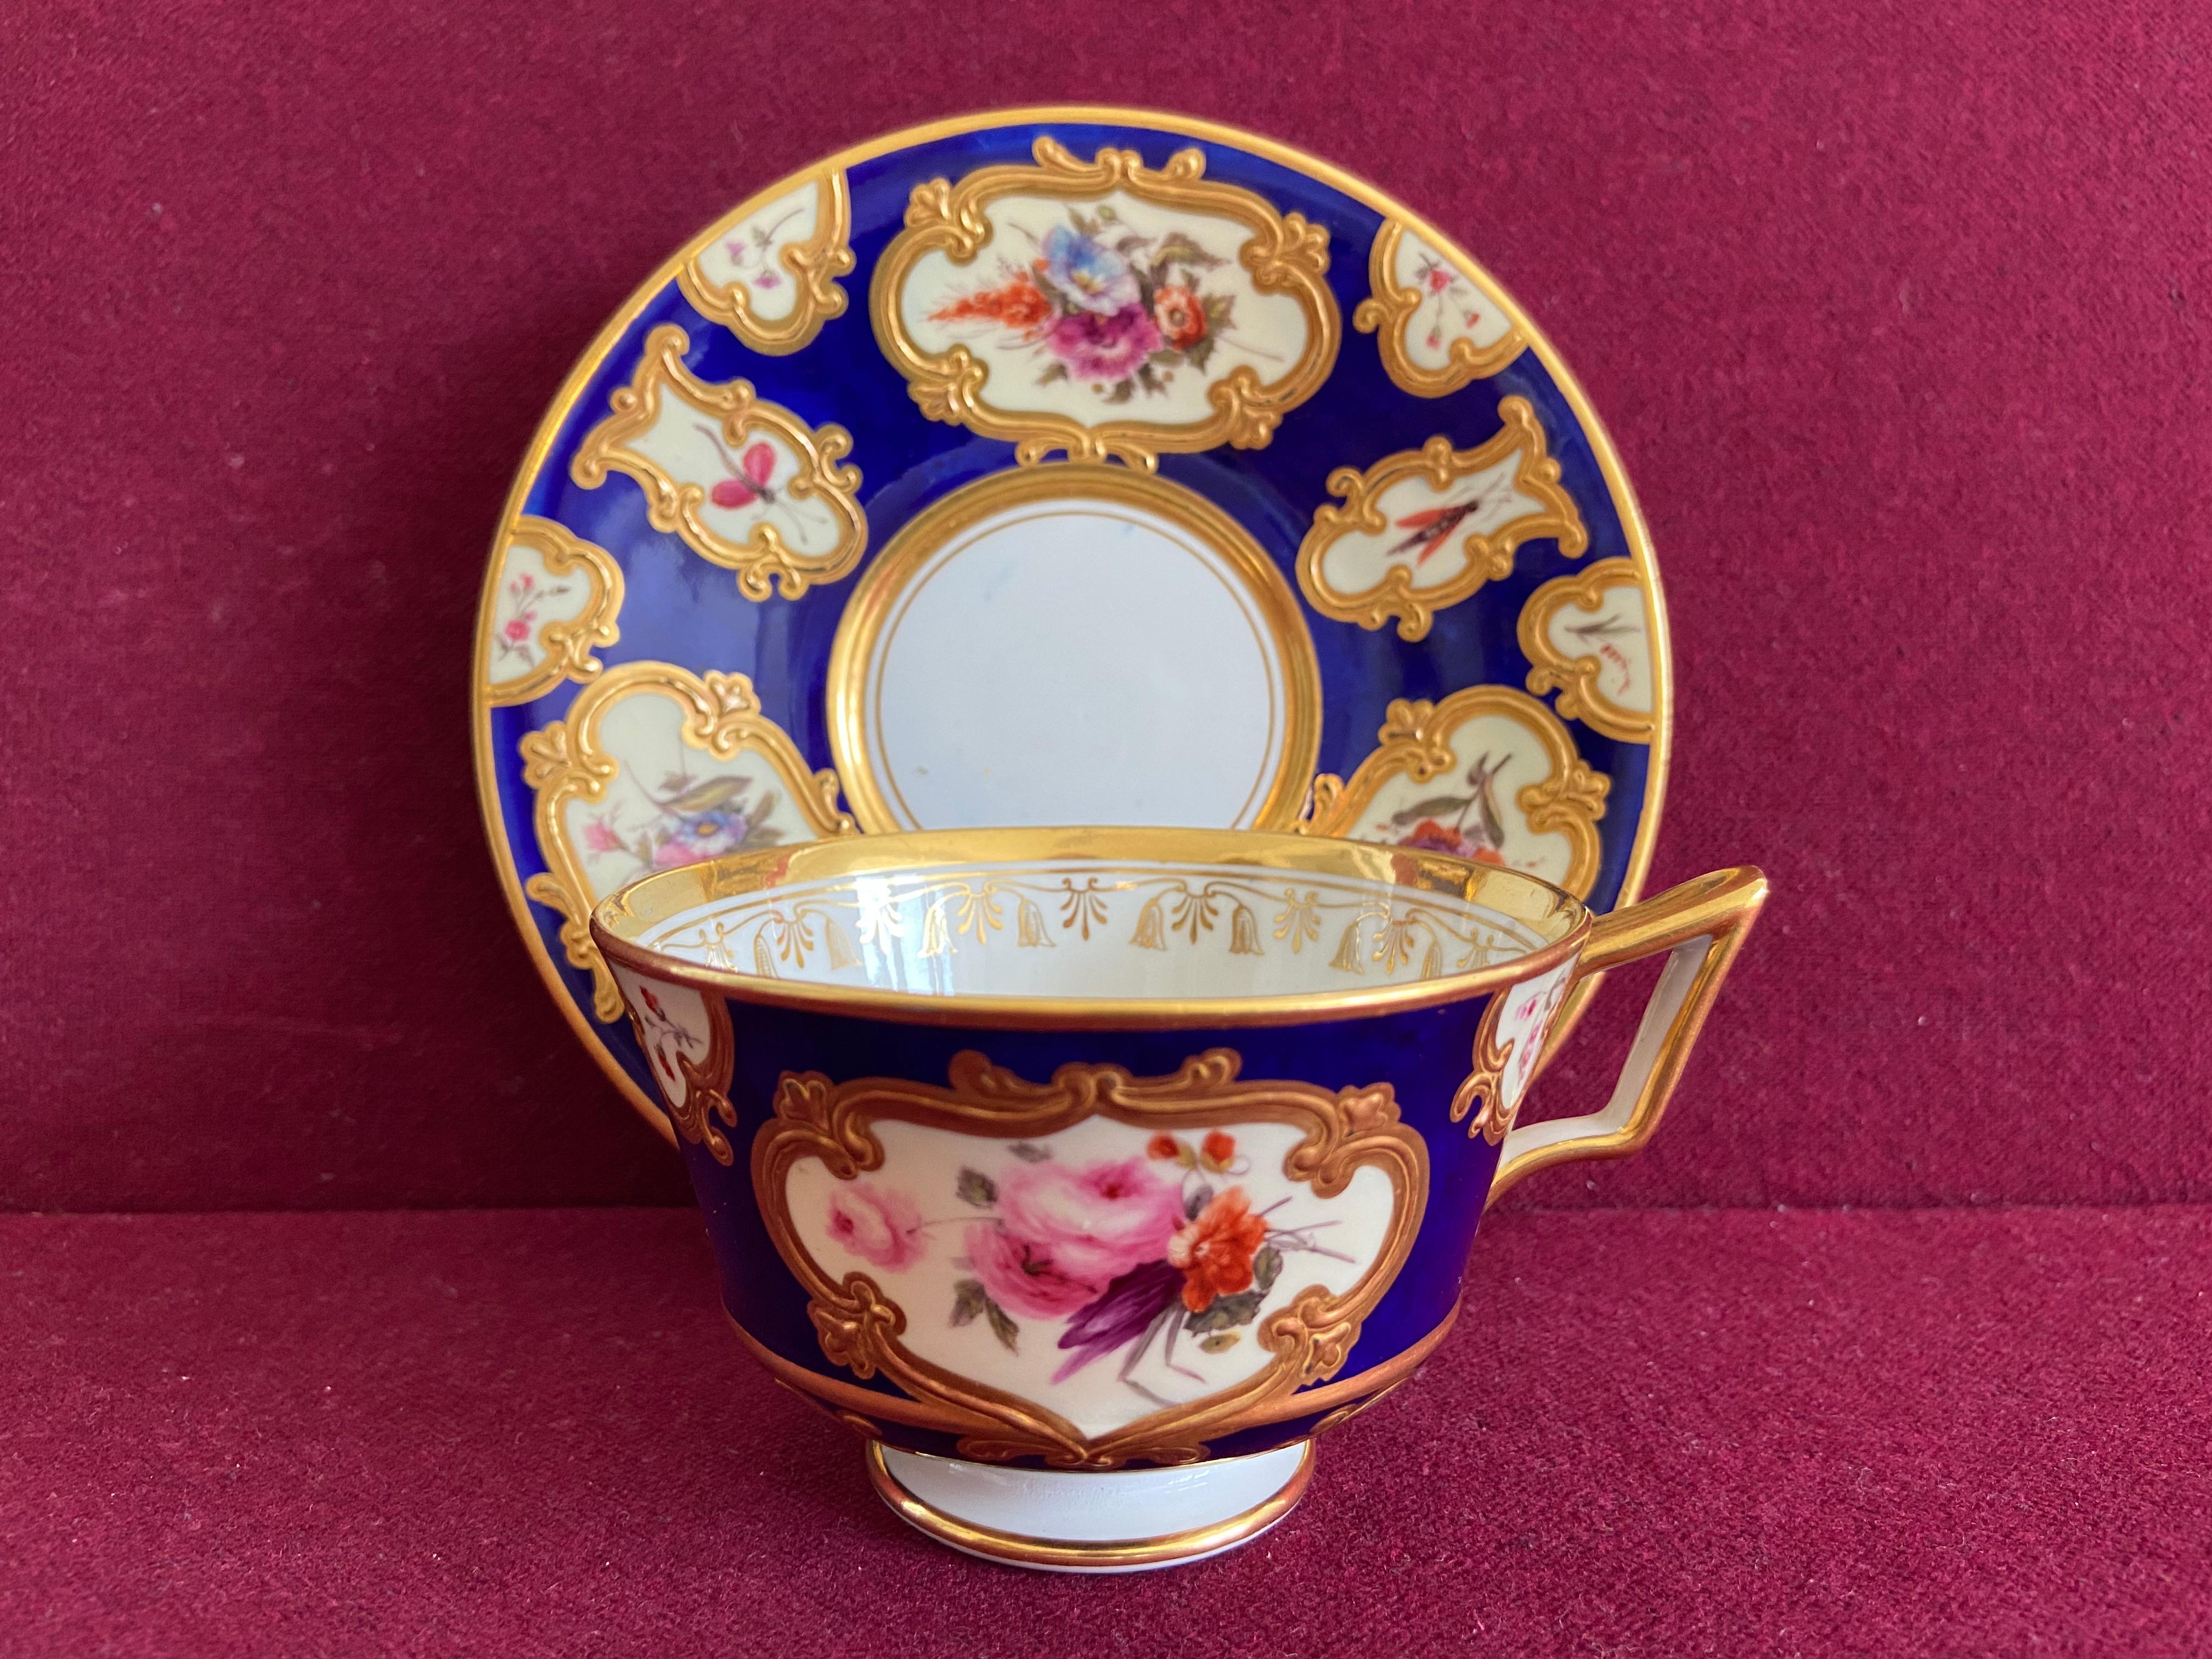 A very fine Flight Barr and Barr Worcester Porcelain tea cup and saucer c.1815. Finely decorated with panels of flowers by Samuel Astles in raised gilded compartments on a cobalt blue ground.

Impressed and printed marks.

Condition: Excellent.